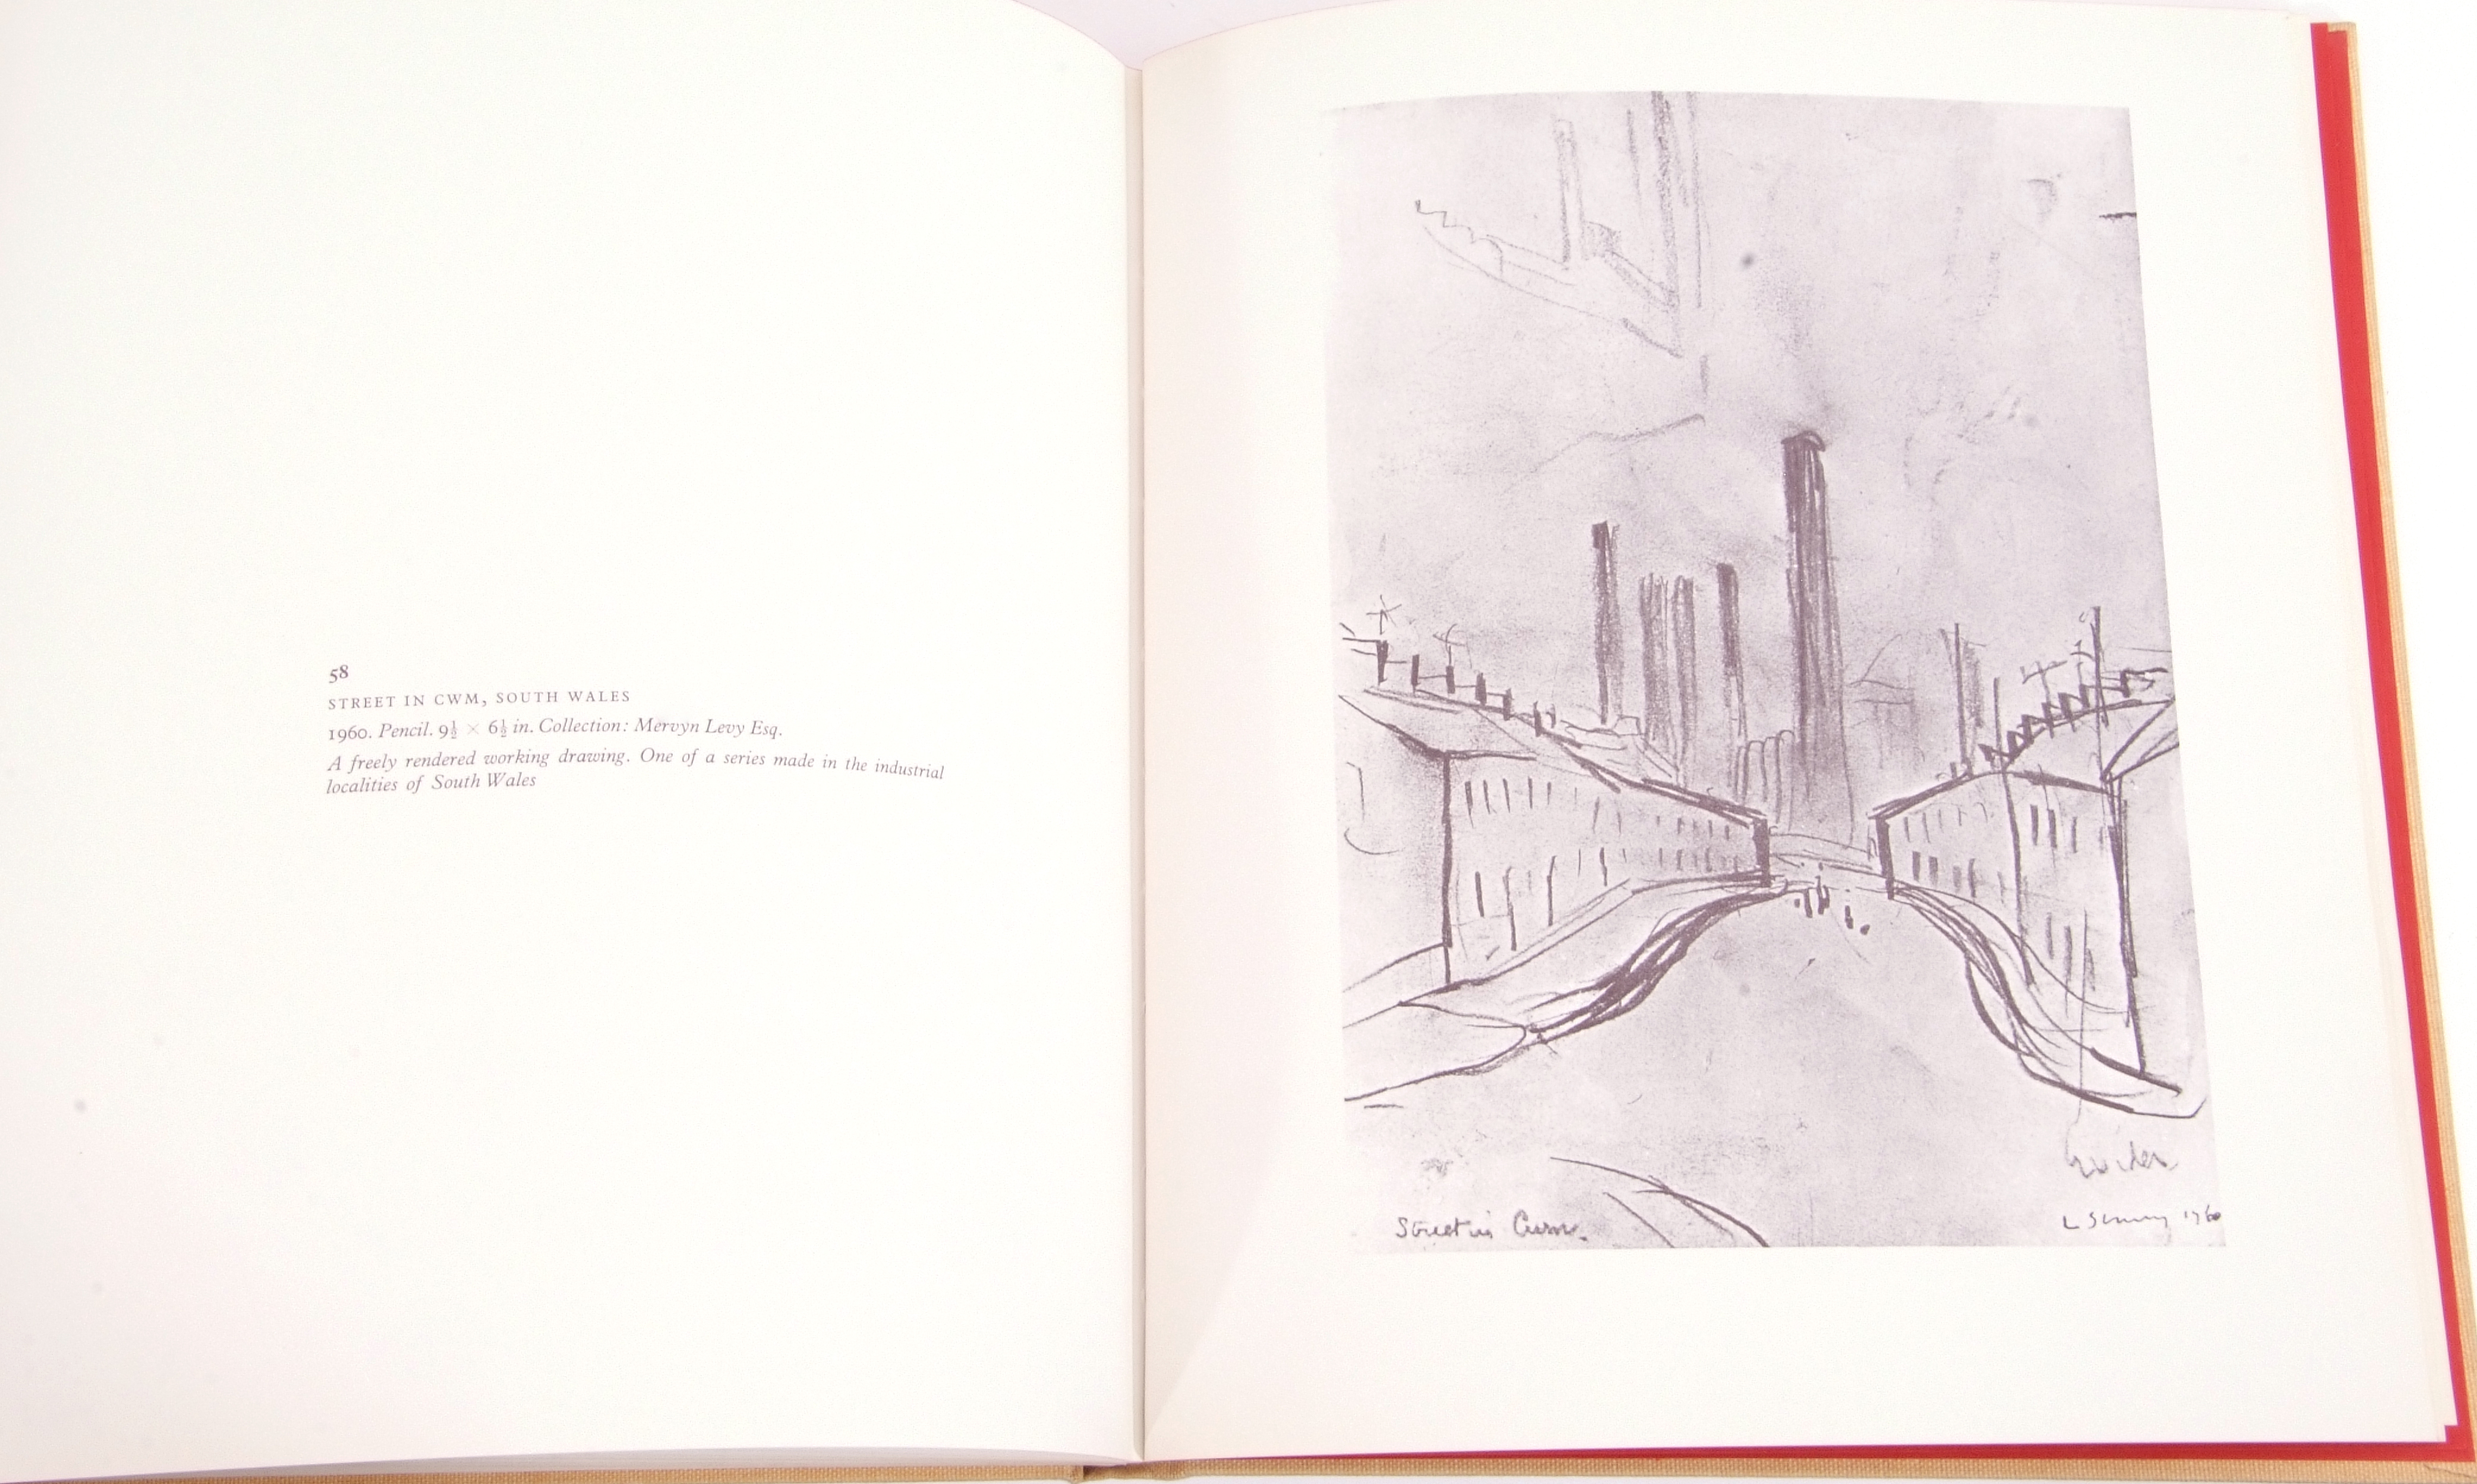 Drawings of L S Lowry, with an introduction and notes by Mervyn Levy - book published by Cory, Adams - Image 6 of 6